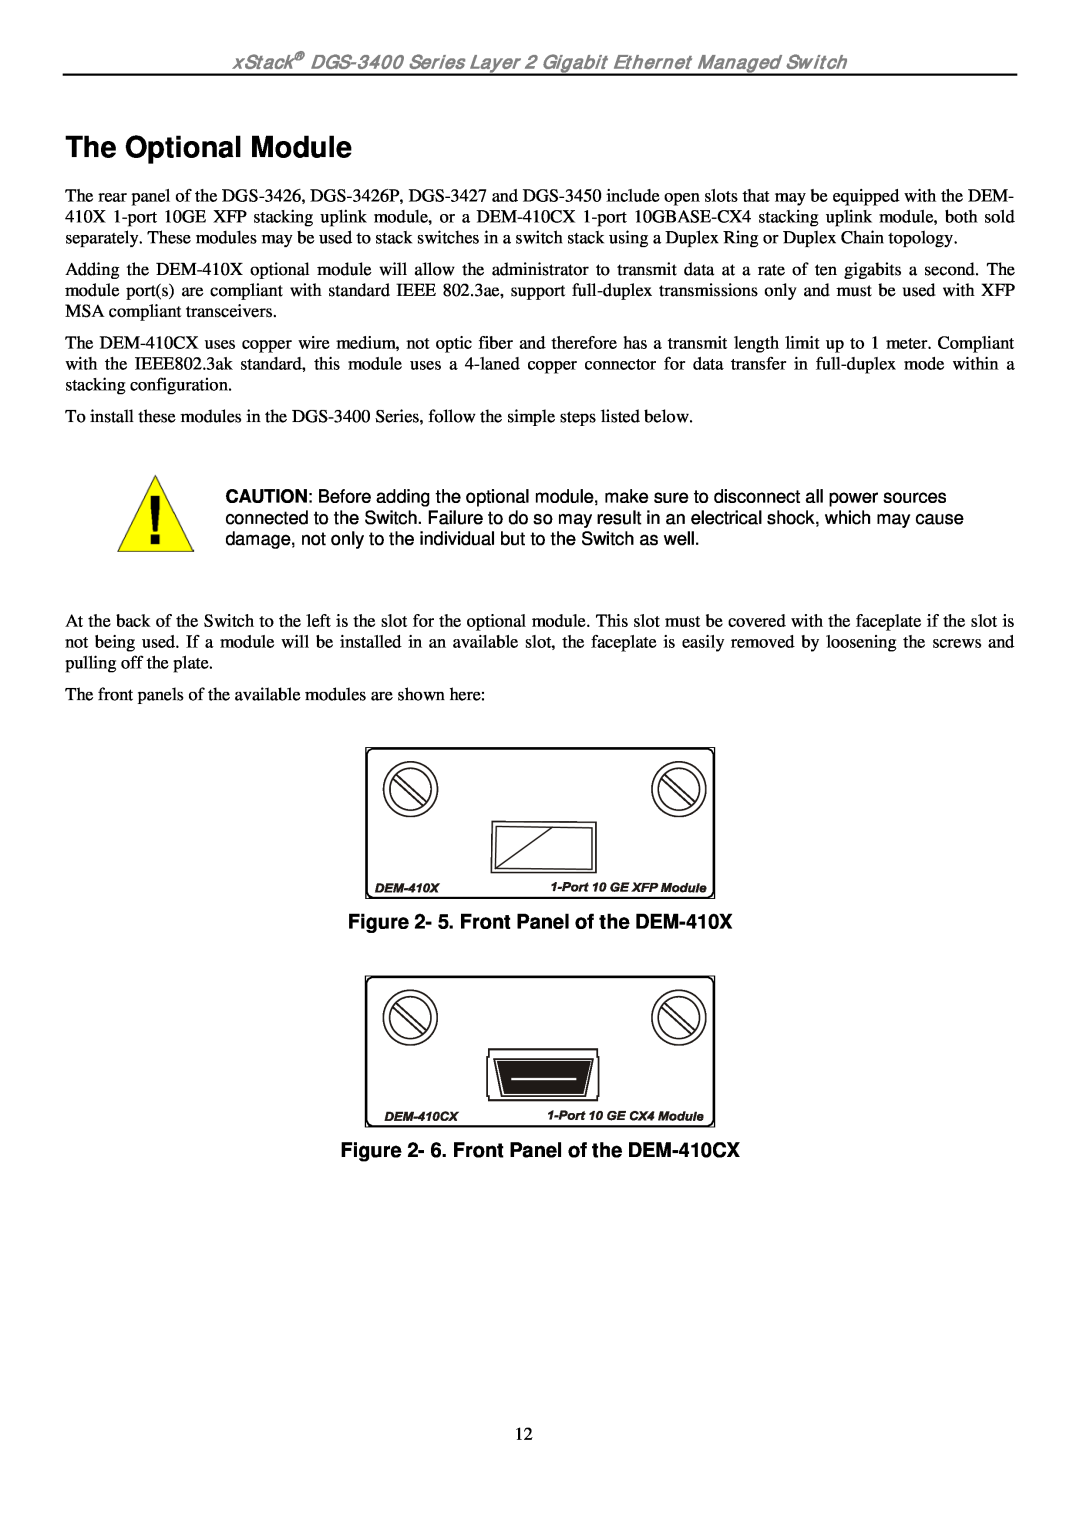 D-Link ethernet managed switch manual The Optional Module, 5. Front Panel of the DEM-410X, 6. Front Panel of the DEM-410CX 